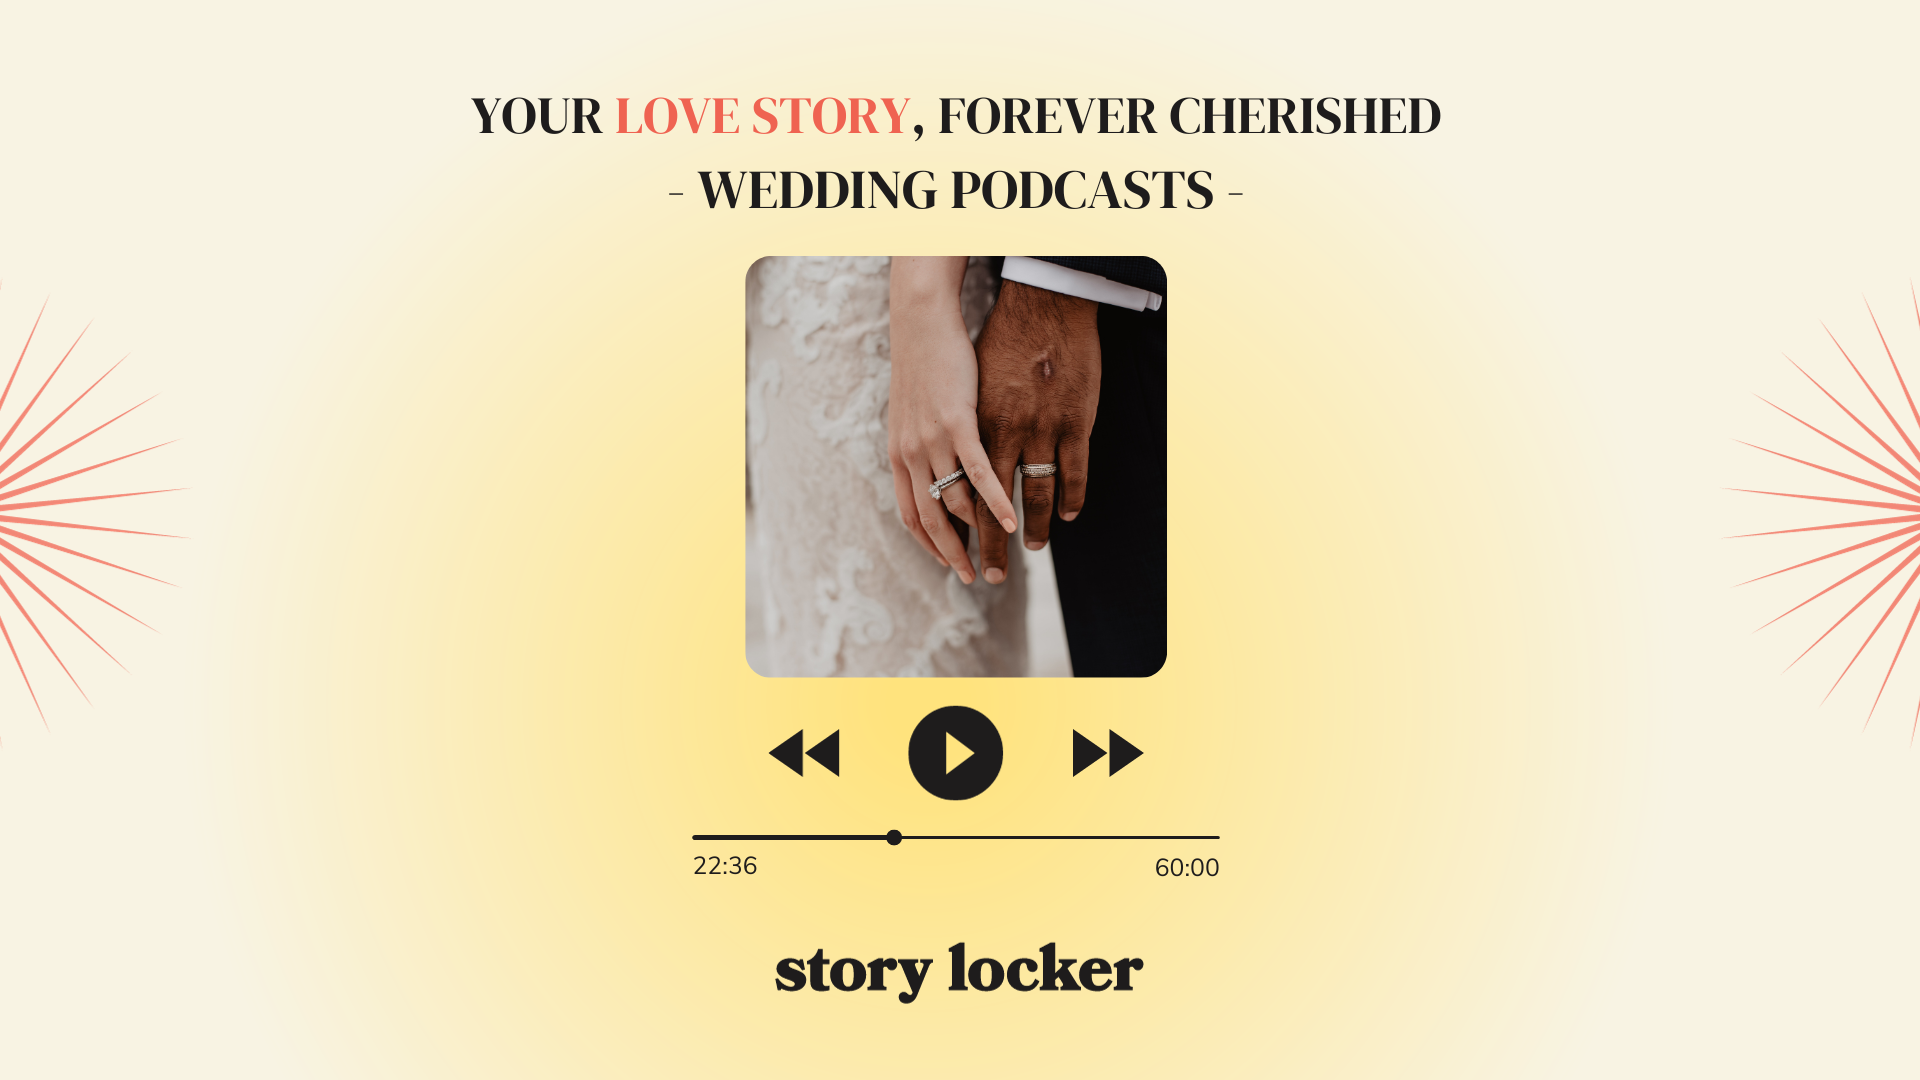  A snapshot of the wedding podcast that has been purchased as a cool and thoughtful wedding gift. 